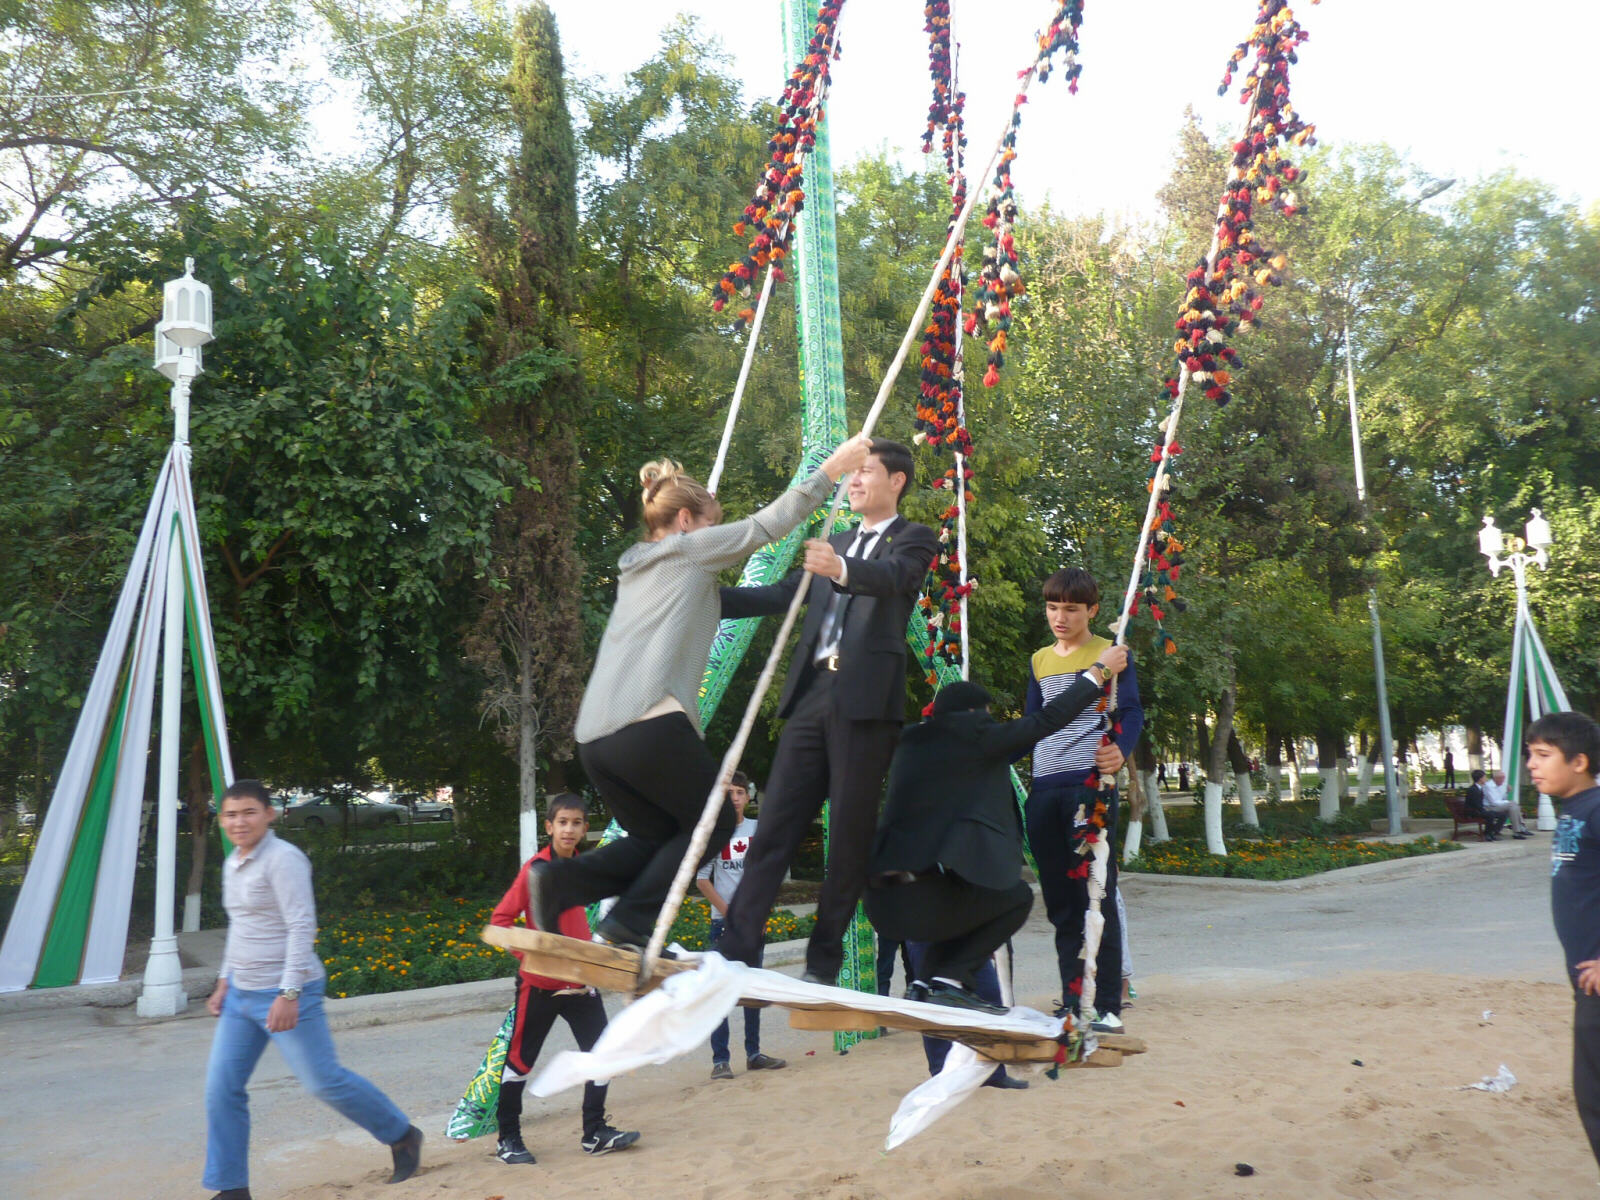 Sheila 'pegging up on the flying plank' in Ashgabat, Turkmenistan